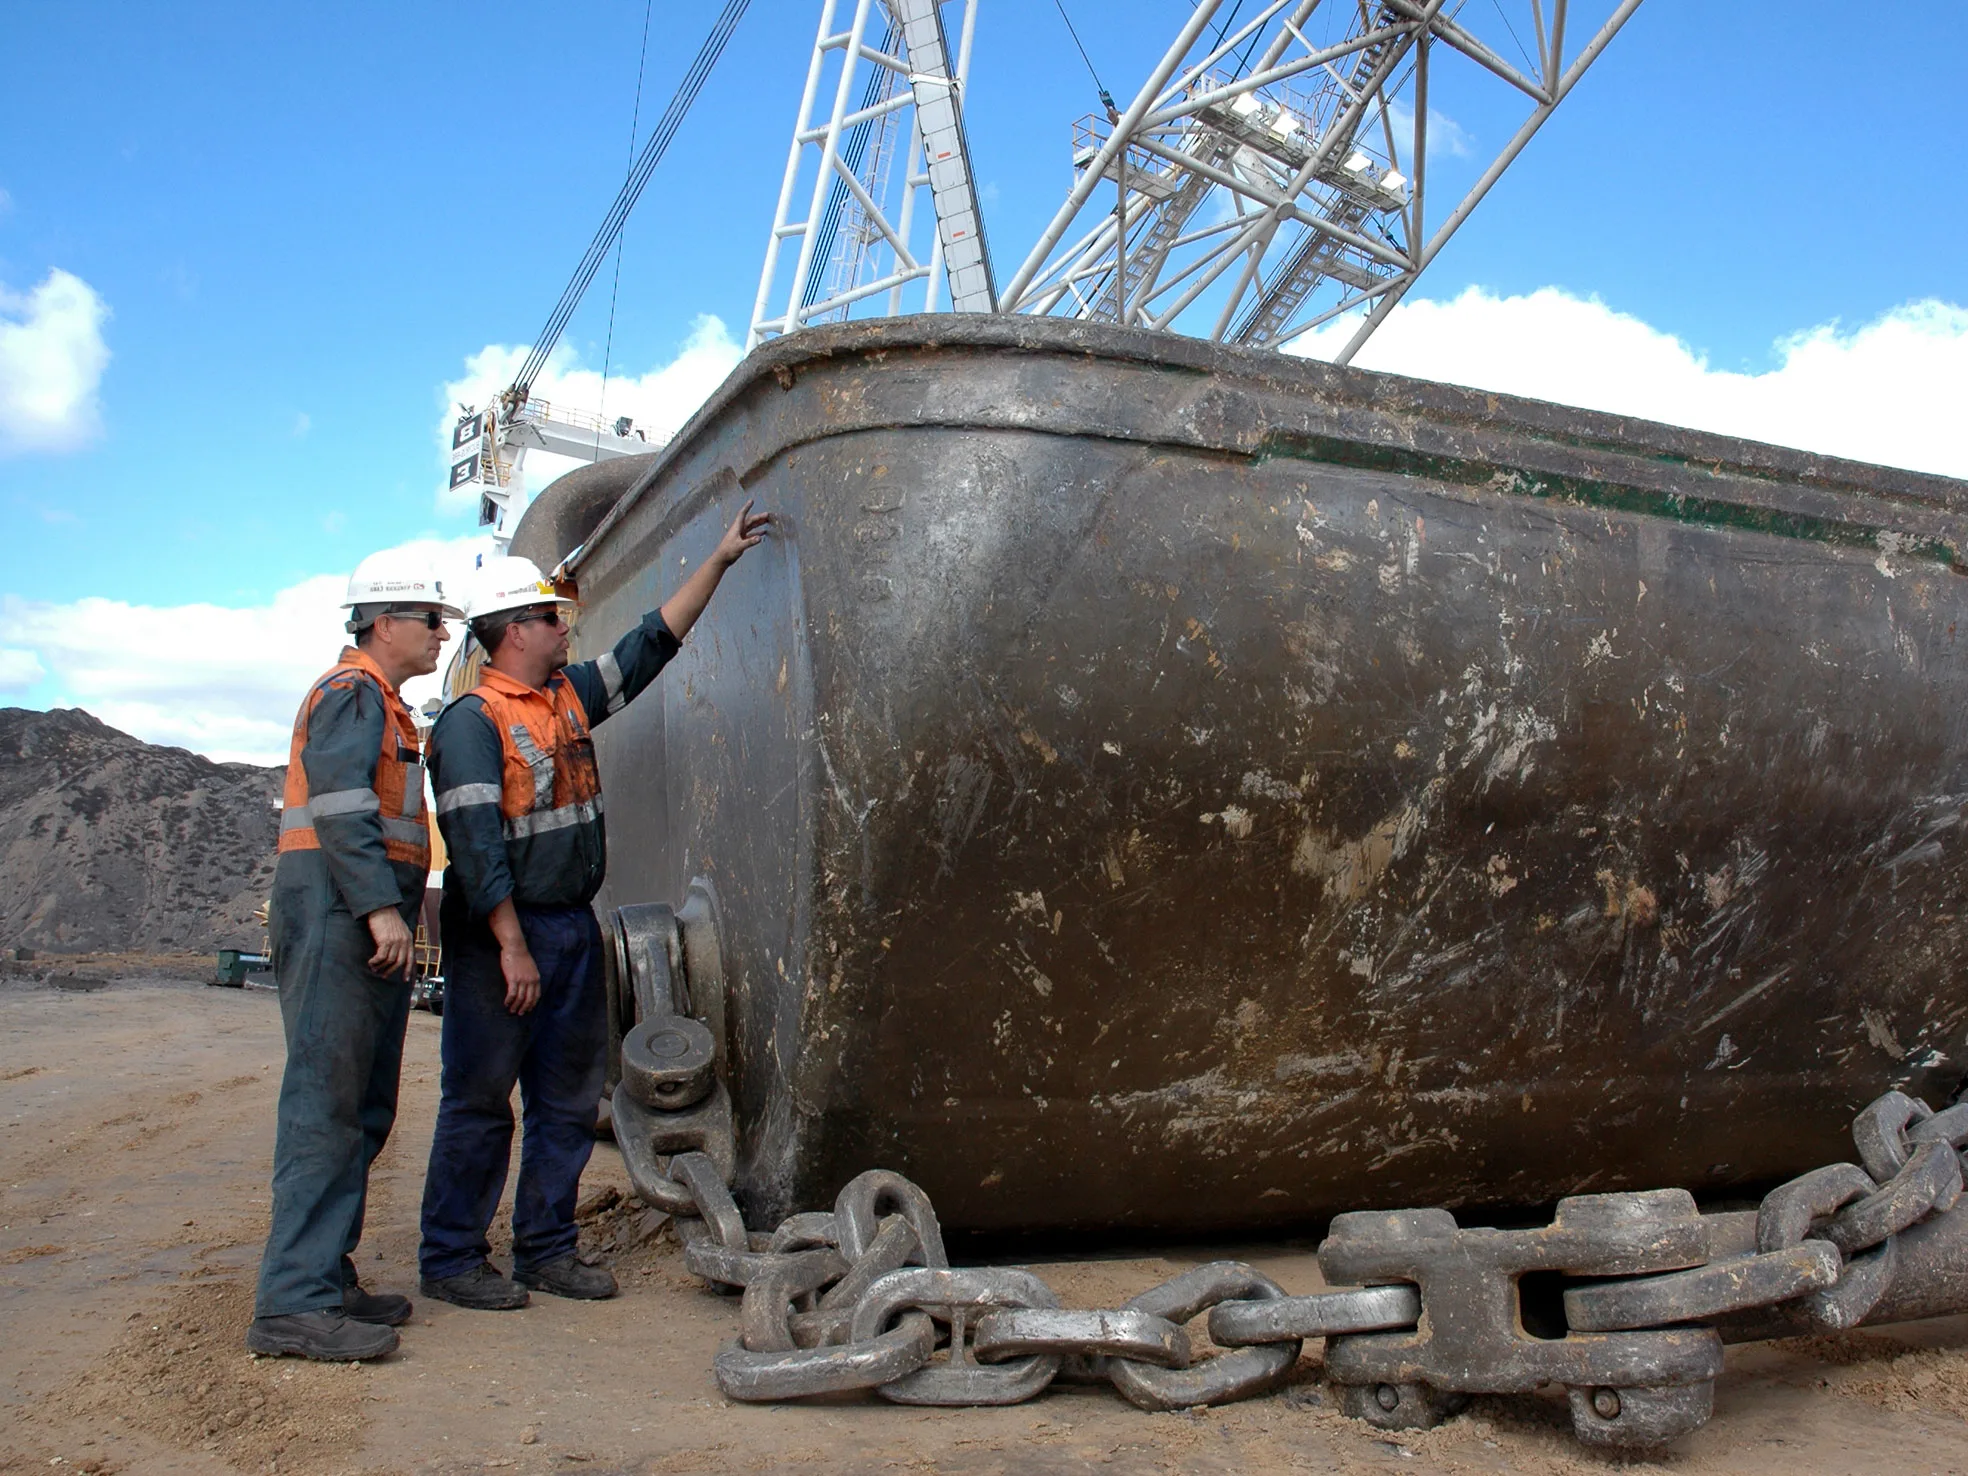 Two mine workers inspecting a large bucket of a dragline